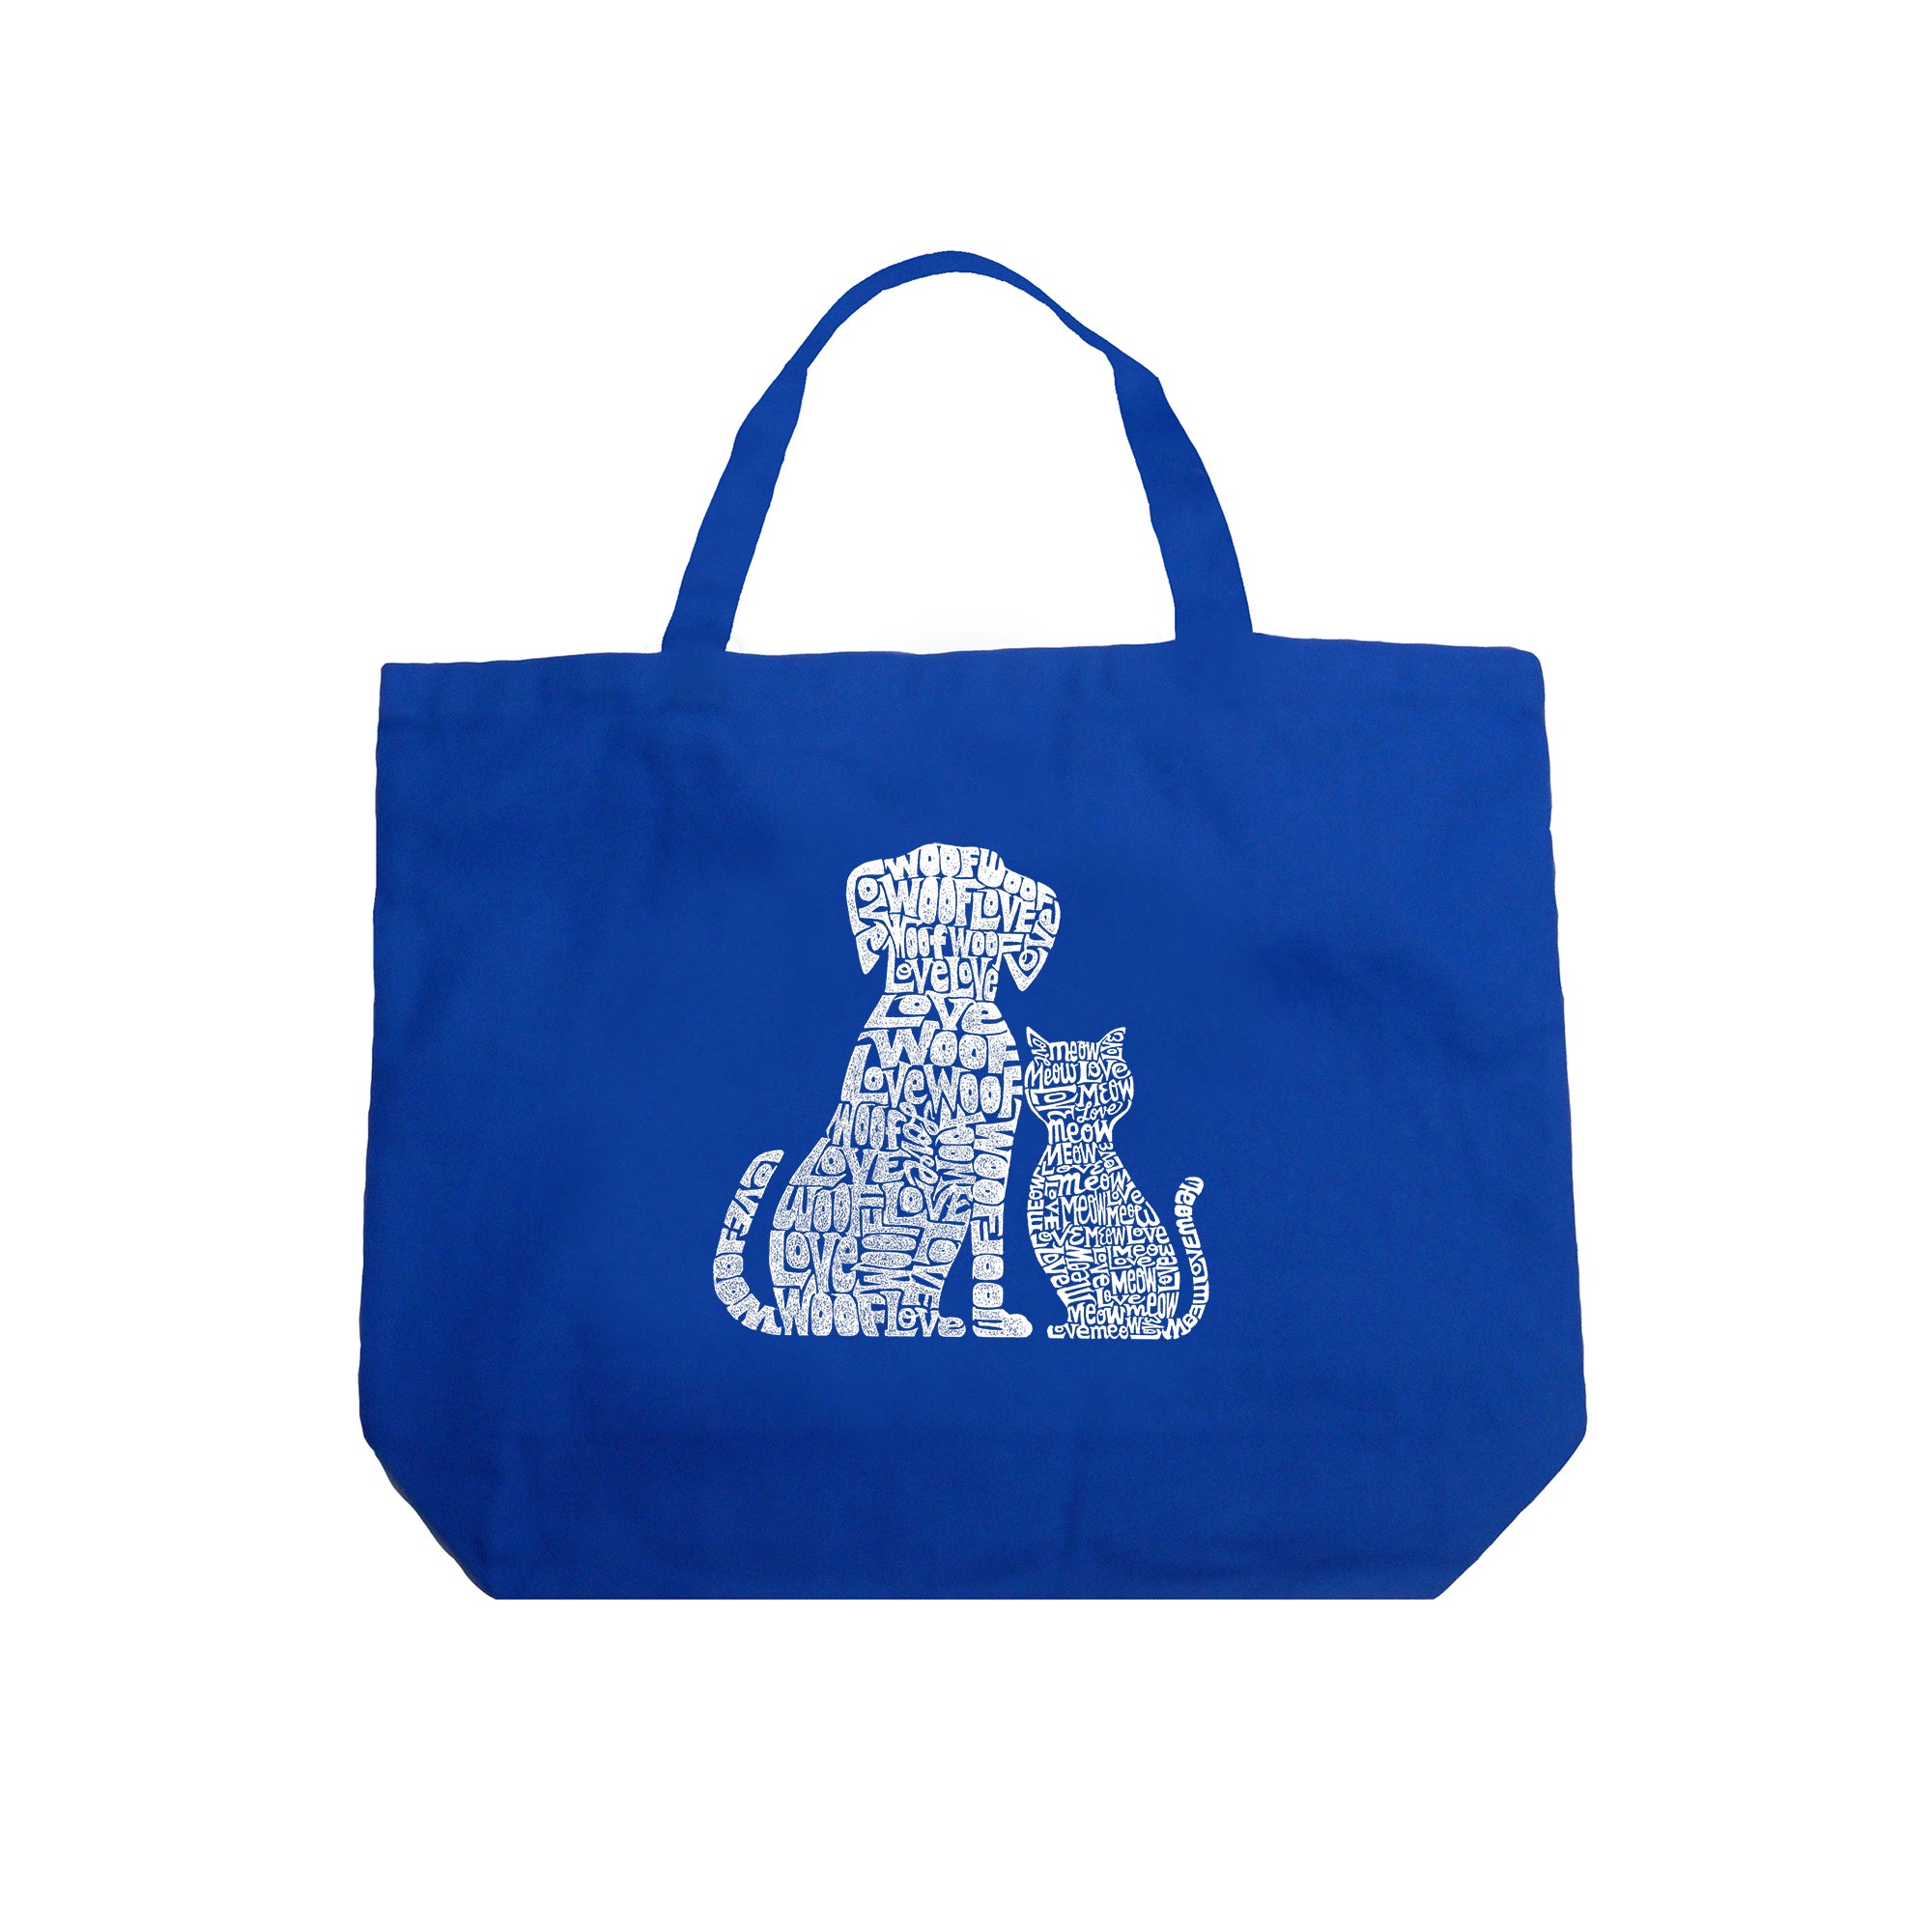 Large Word Art Tote Bag - Dogs And Cats - Large - Royal